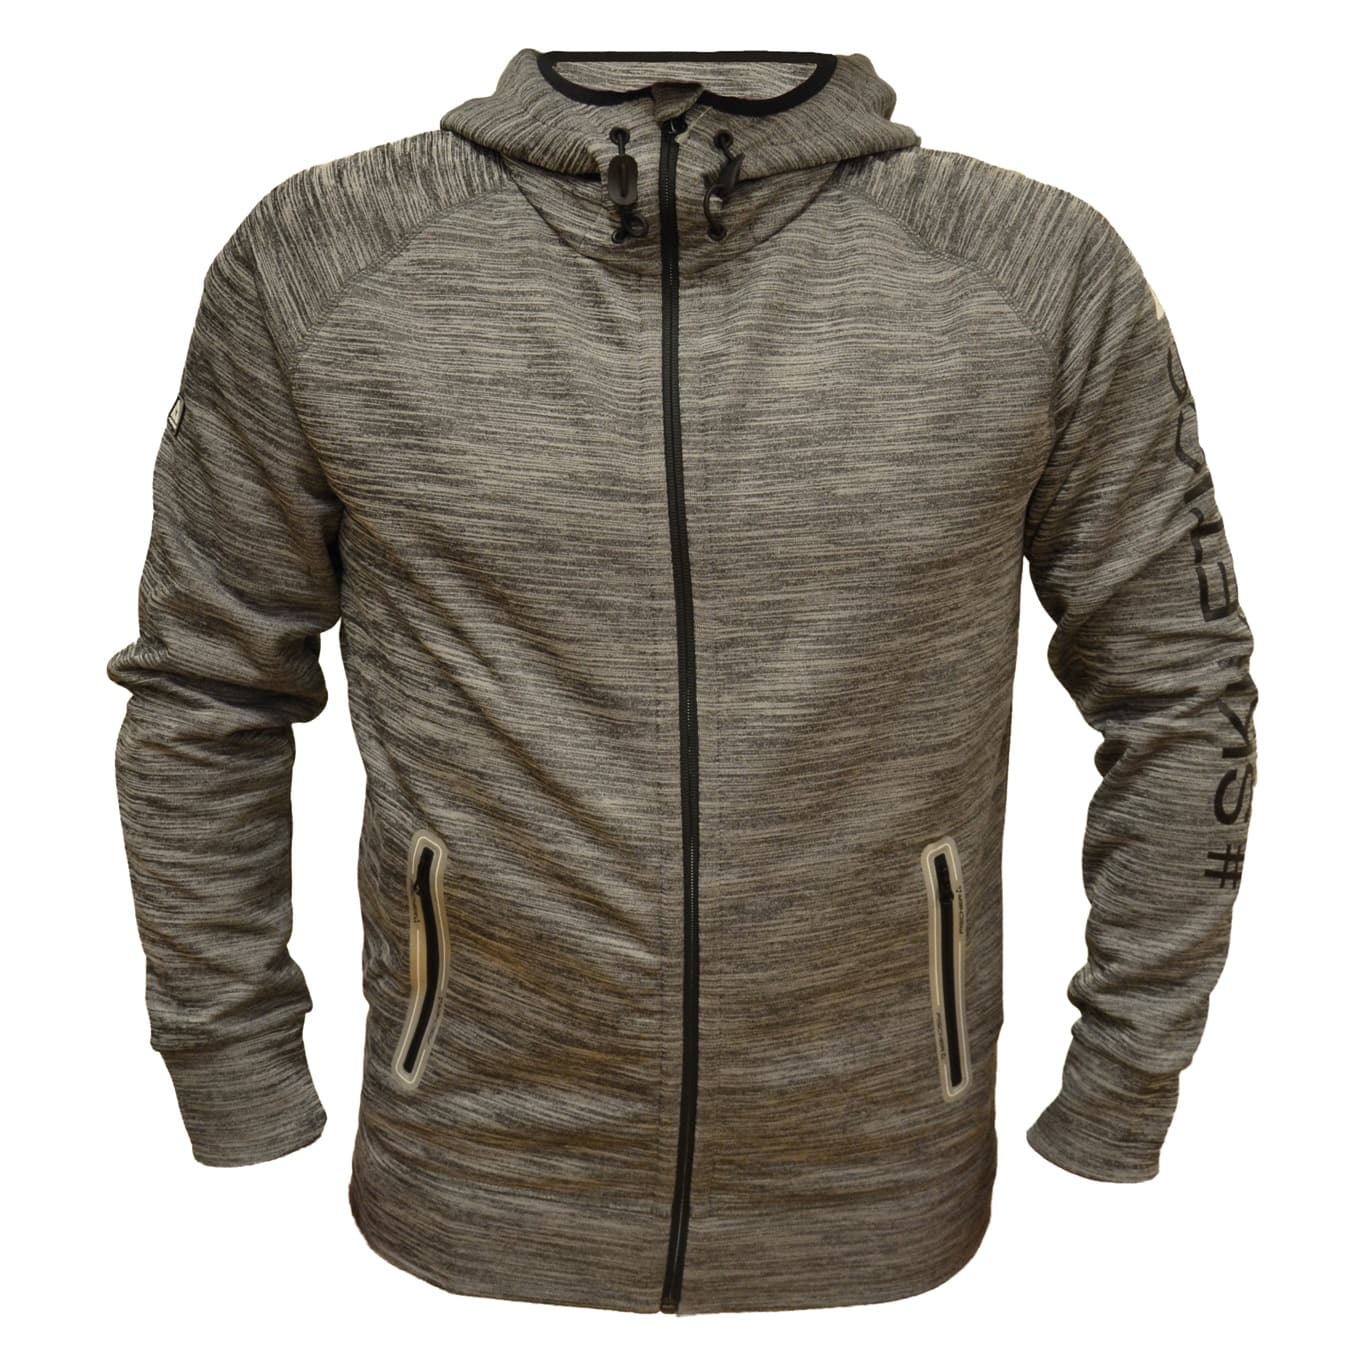 Buy Fischer Skilethics Jacket from Outnorth